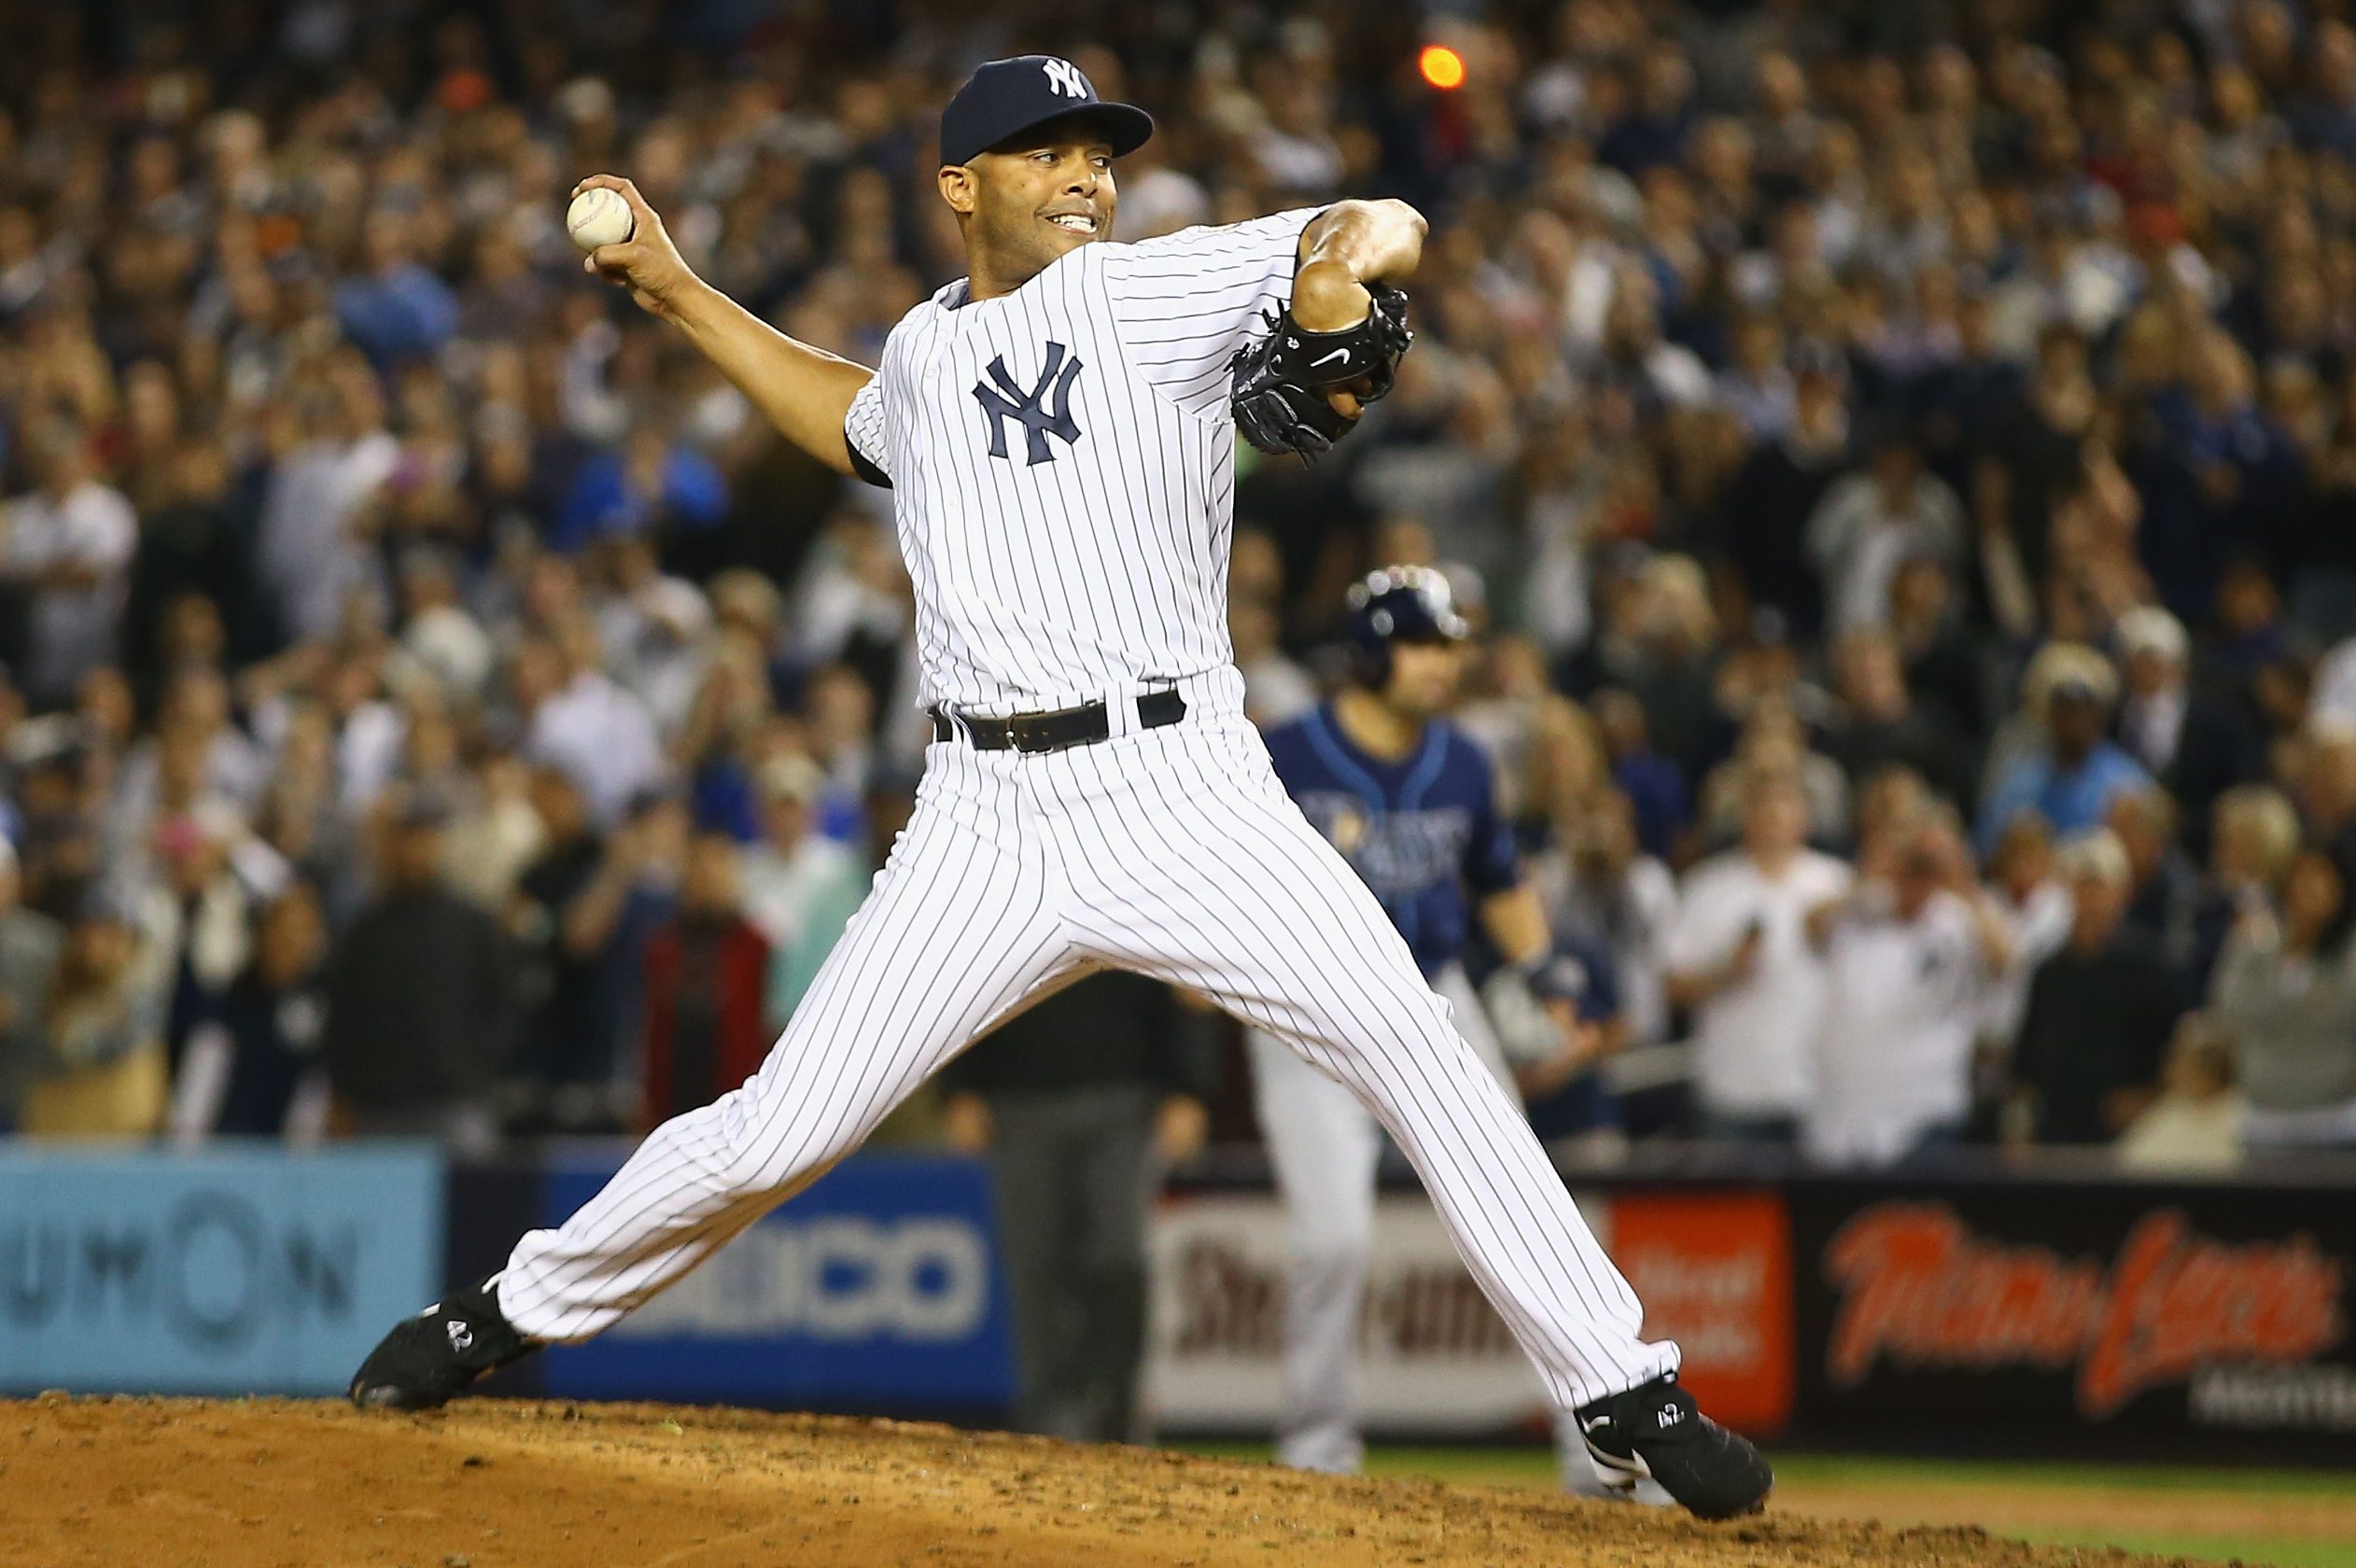 Mariano Rivera III follows in father's pitching footsteps